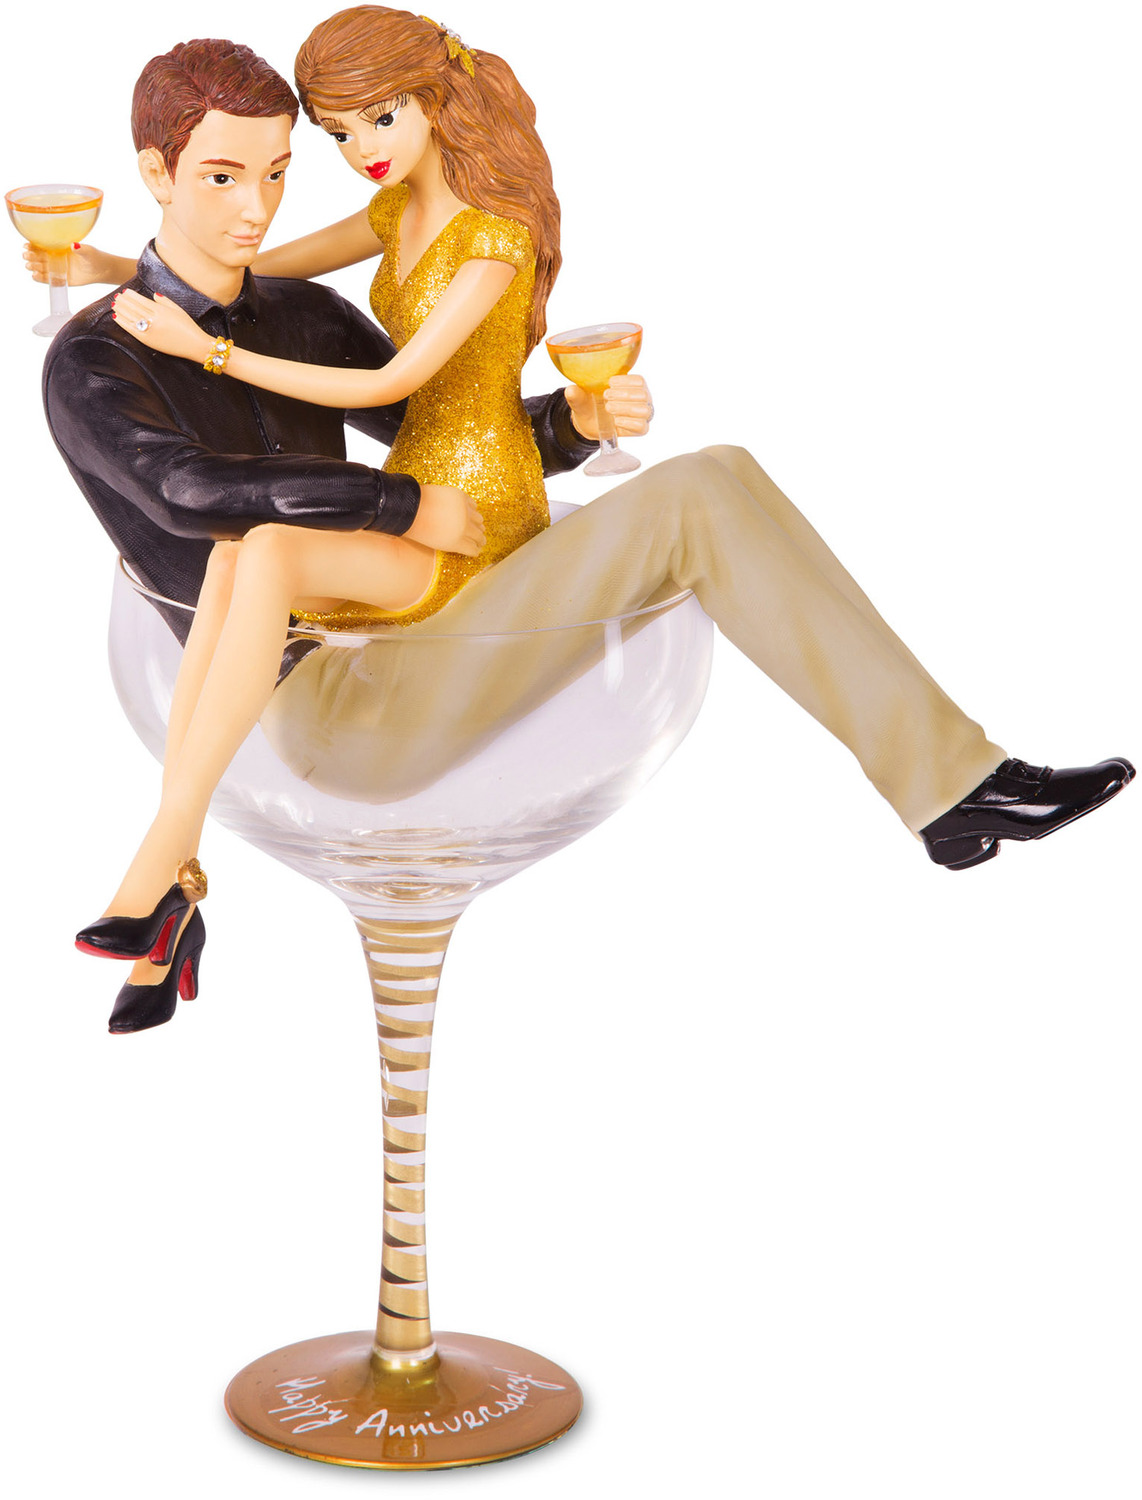 Happy Anniversary! by Hiccup - <em>Anniversary</em> - Married Couple Figurine & Champagne Glass -